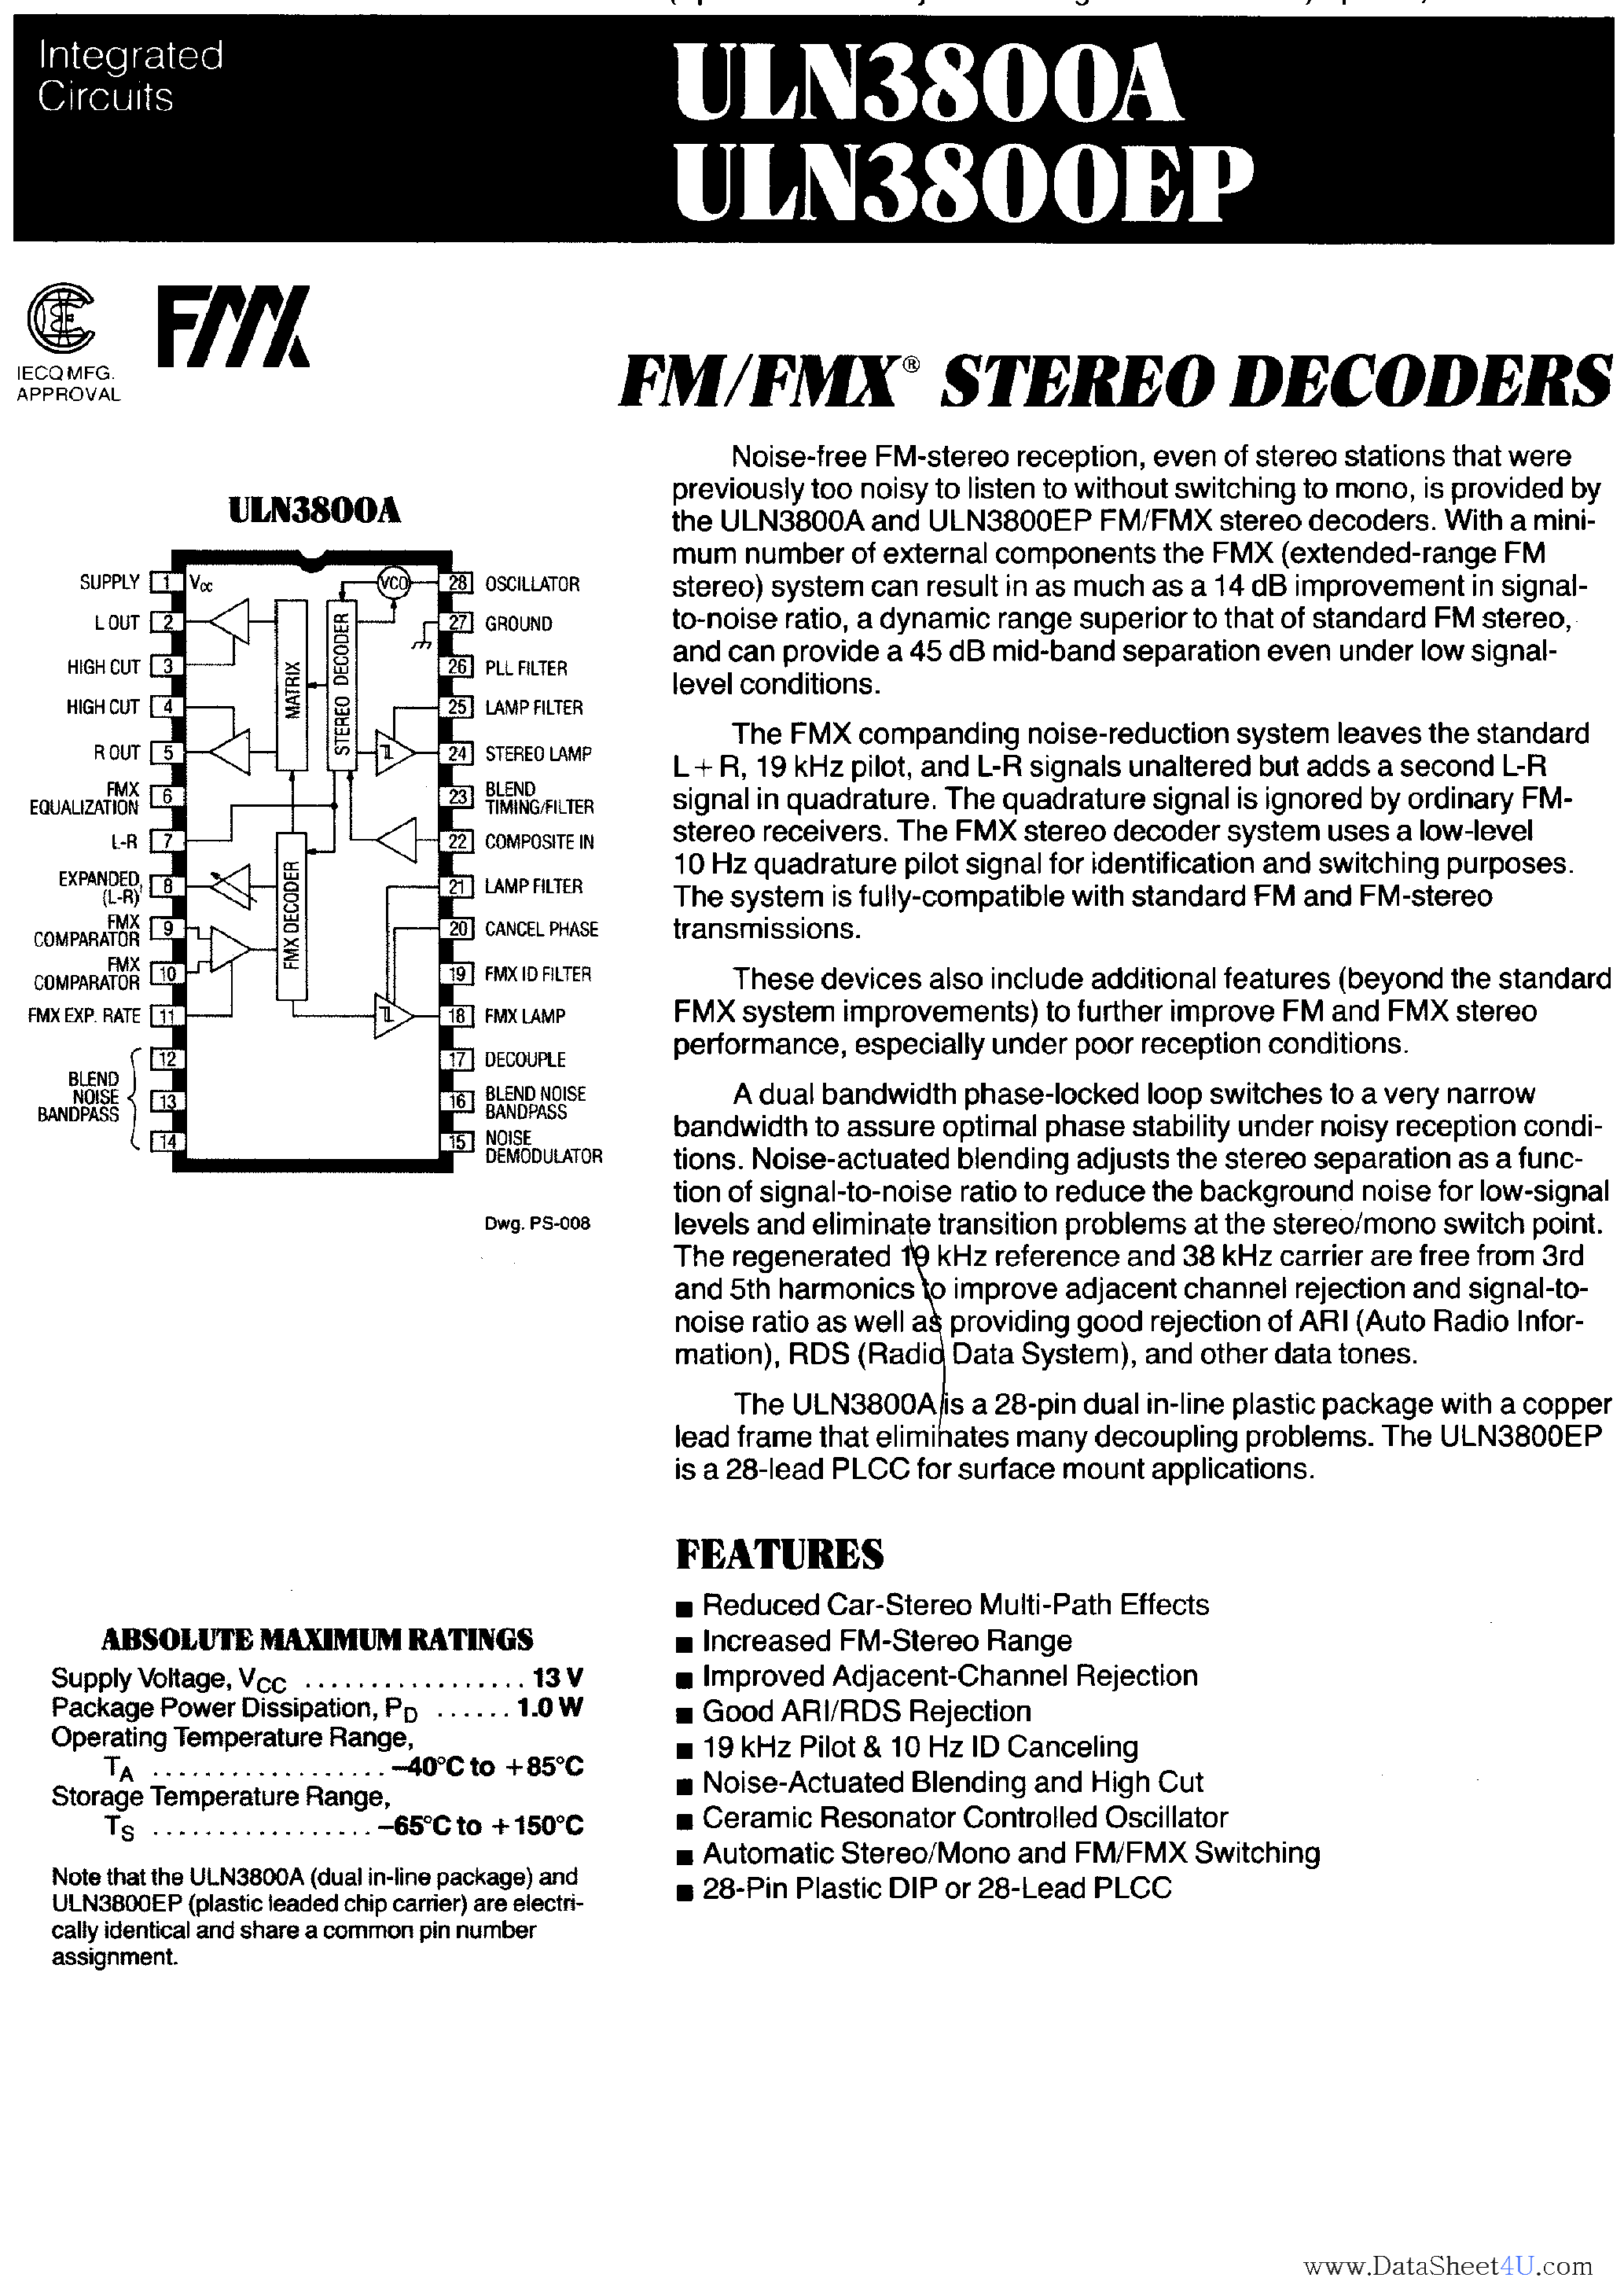 Datasheet ULN3800A - FM / FMX Stereo Decoders page 1